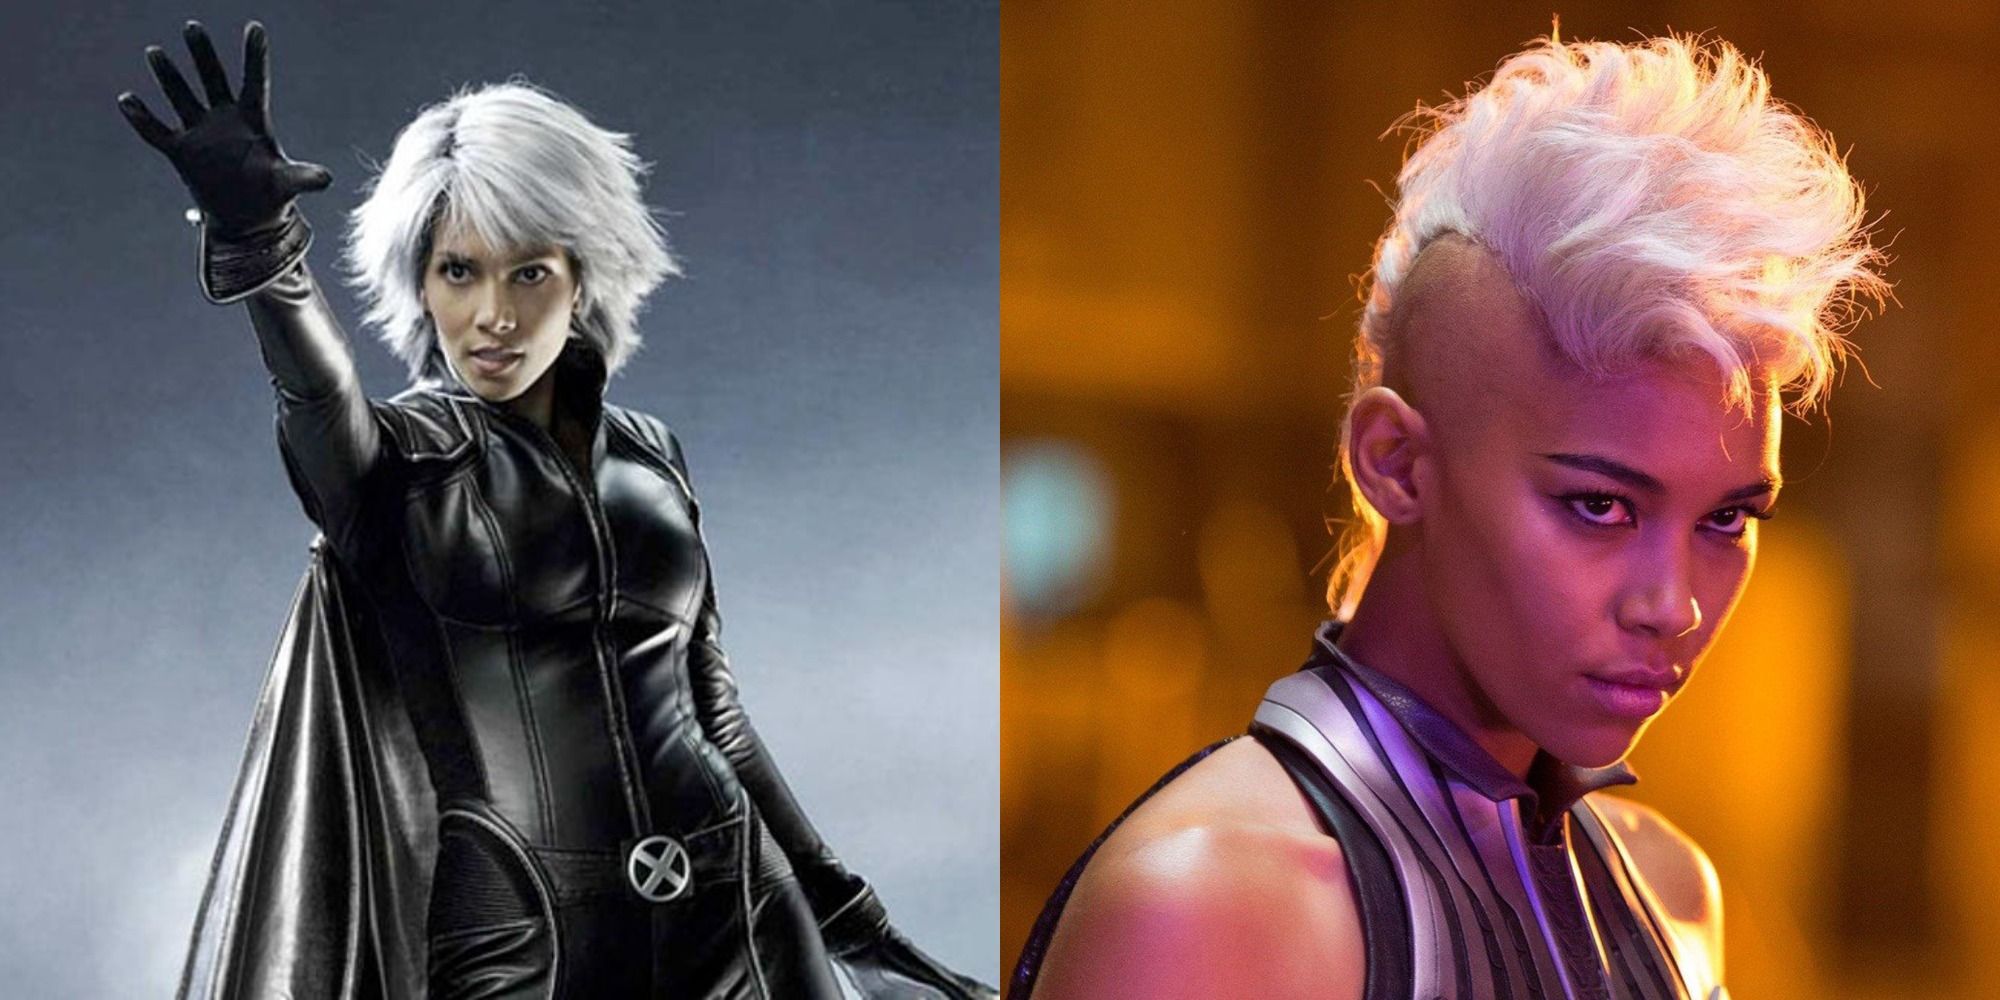 Storm-Halle-Berry-uses-her-powers-in-the-original-X-Men-trilogy-while-young-Storm-Alexandra-Shipp-looks-intimidating-X-Men-Apocalypse.jpg